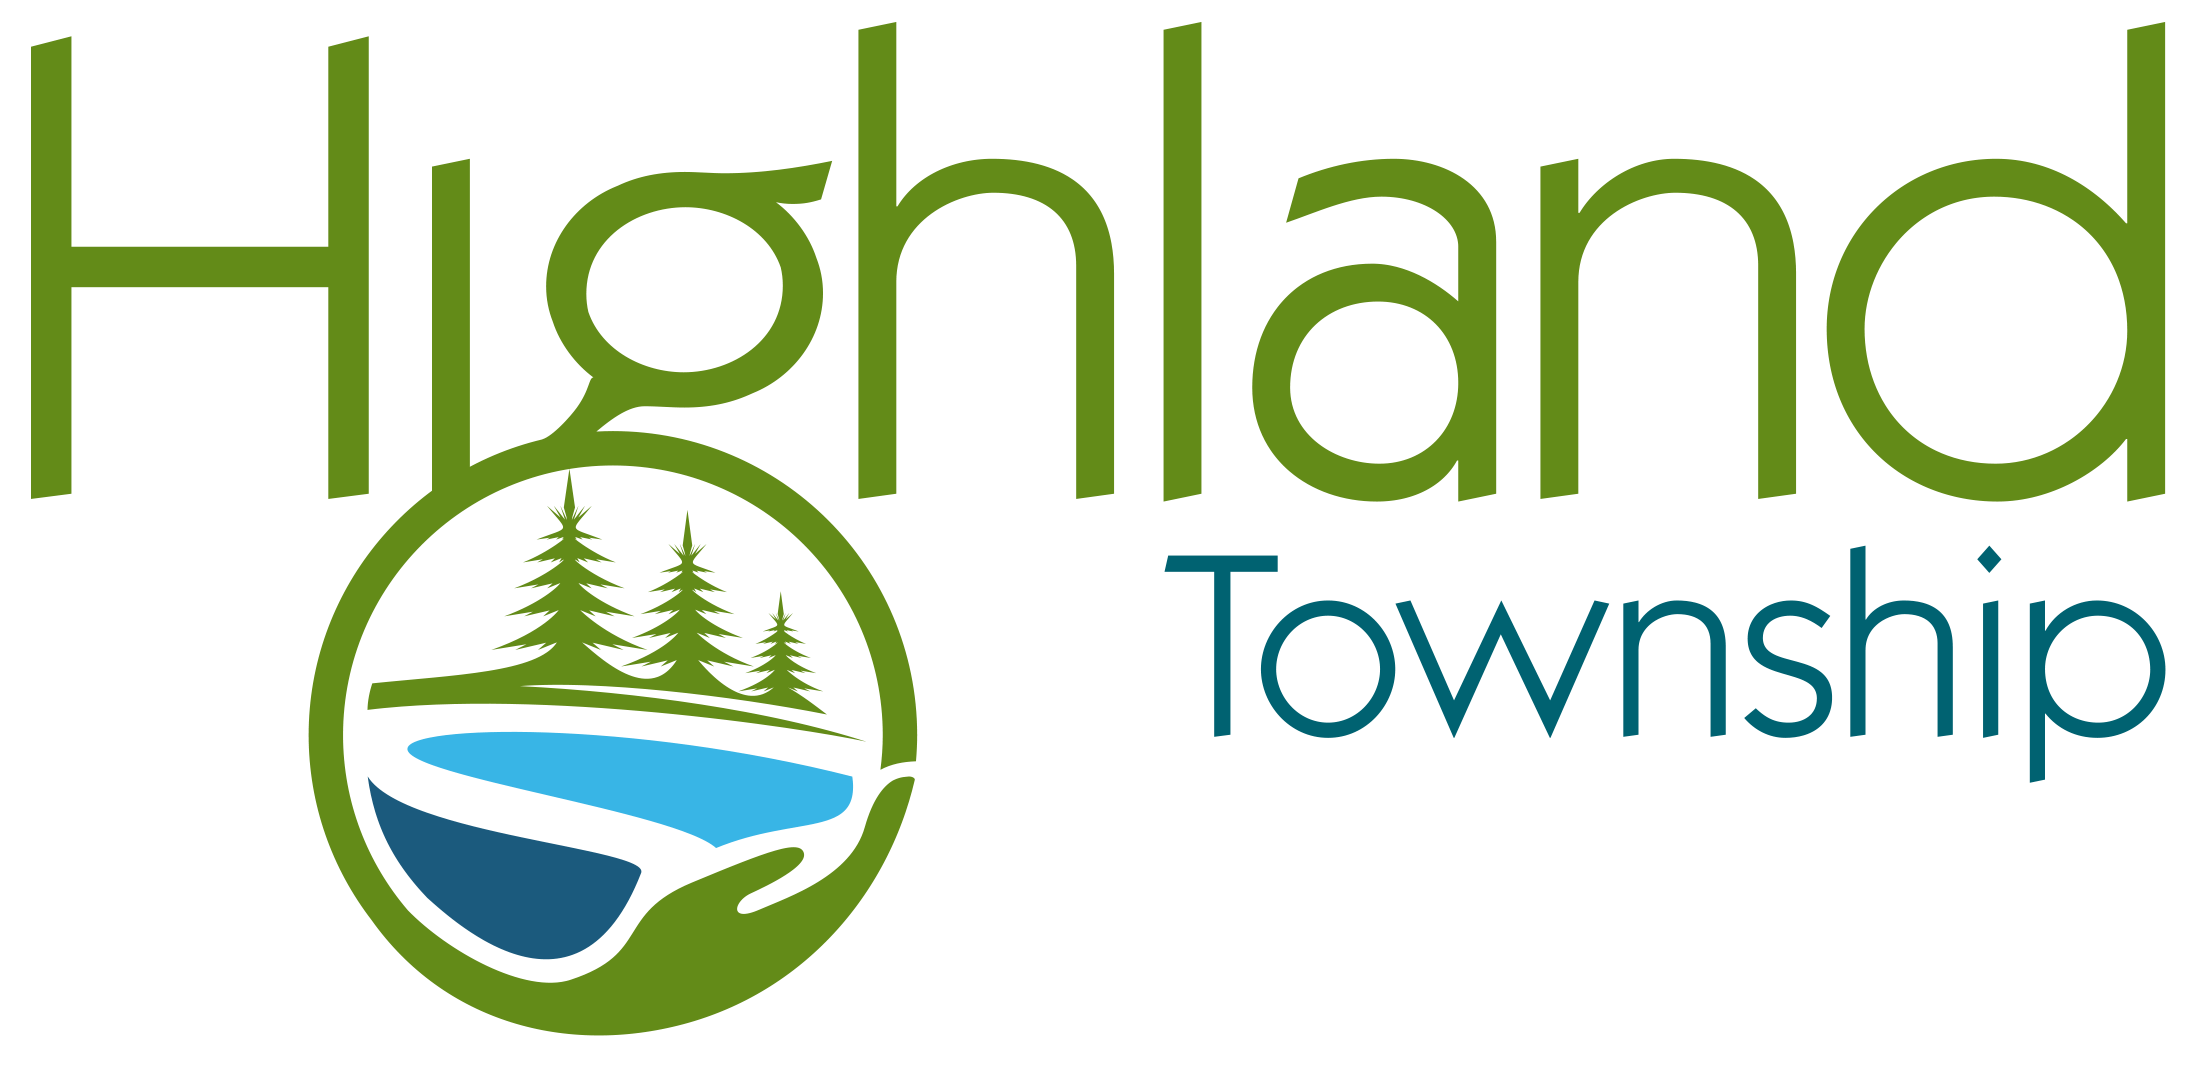 Township Logo - Highland Township Home Page